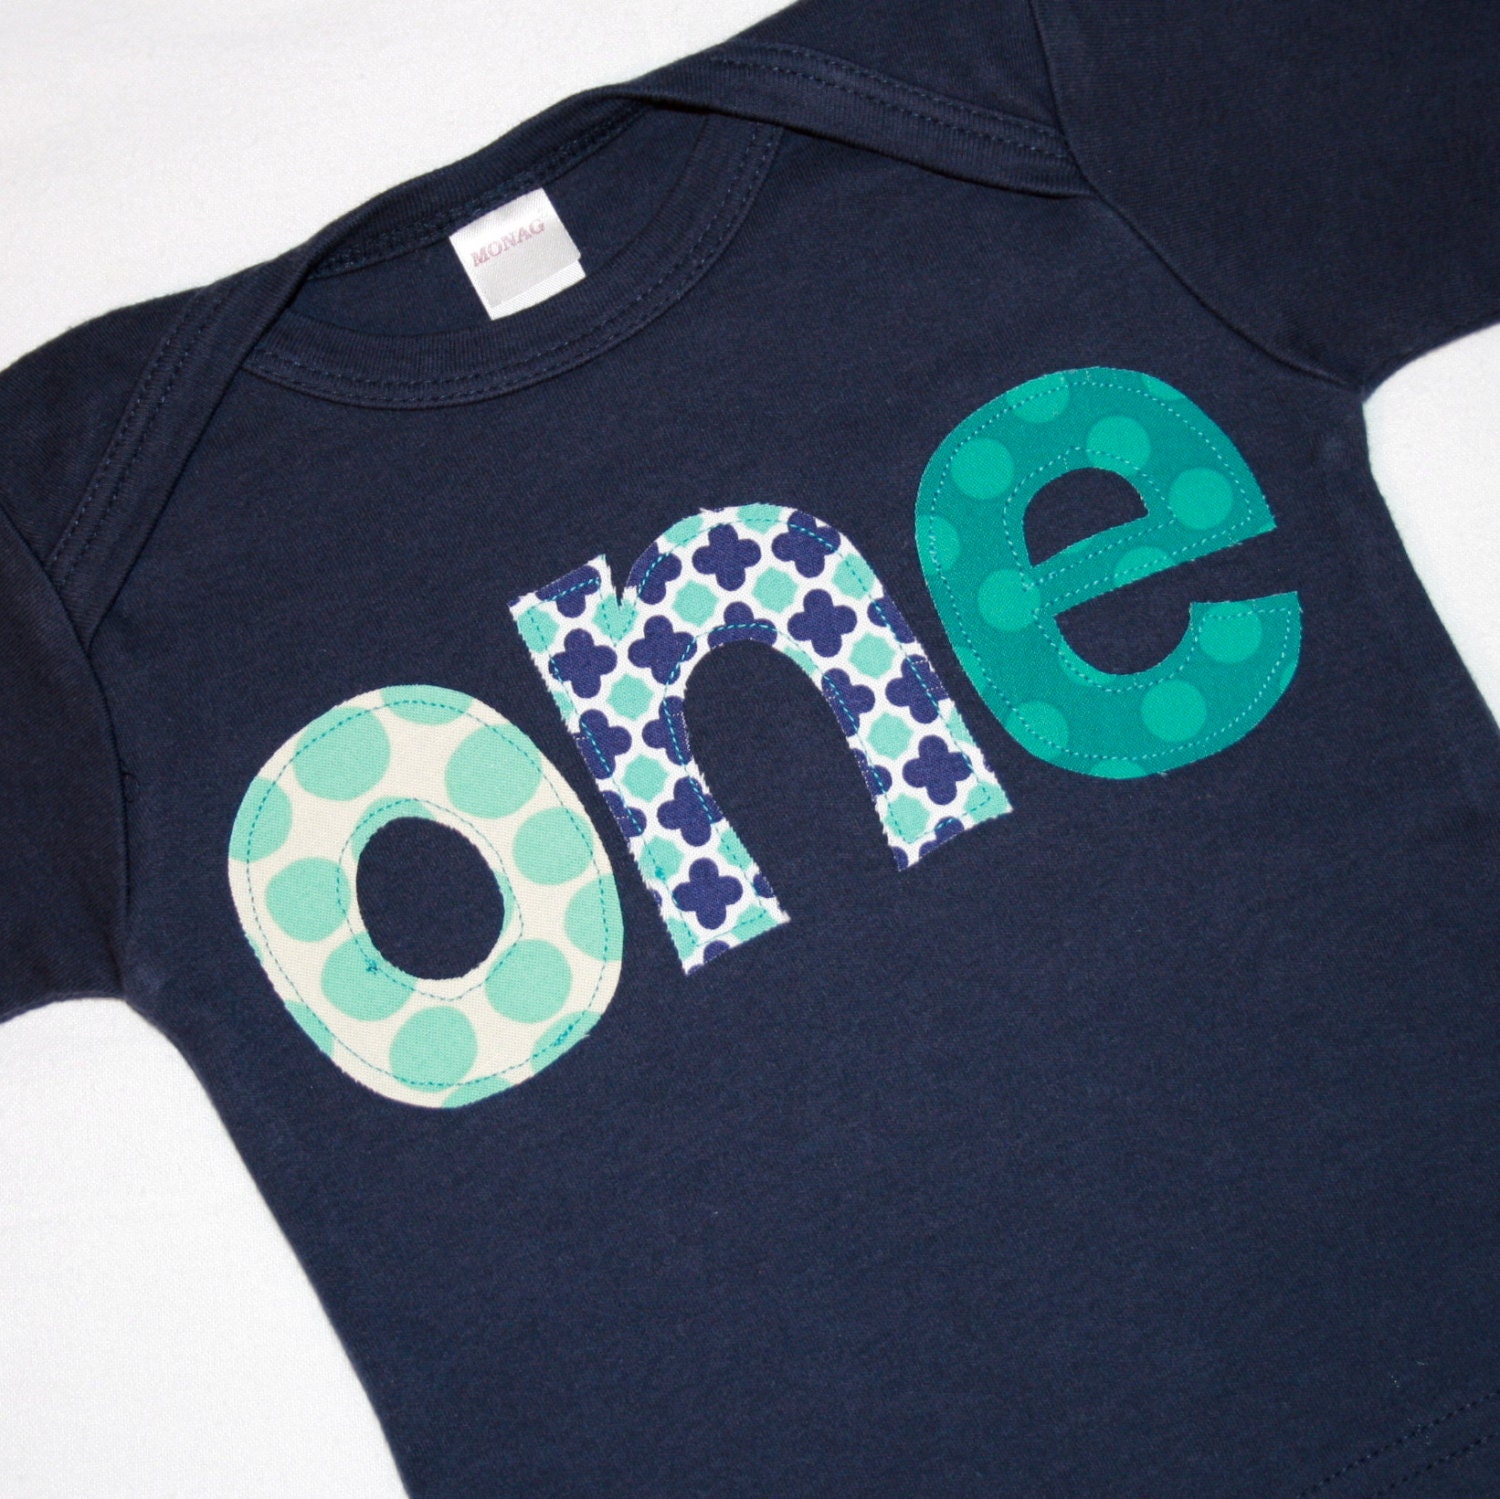 Boys ONE Shirt for First Birthday - 12-18 month long sleeved navy blue tshirt with aqua and white lettering - READY to Ship - ThePolkaDotTotSpot